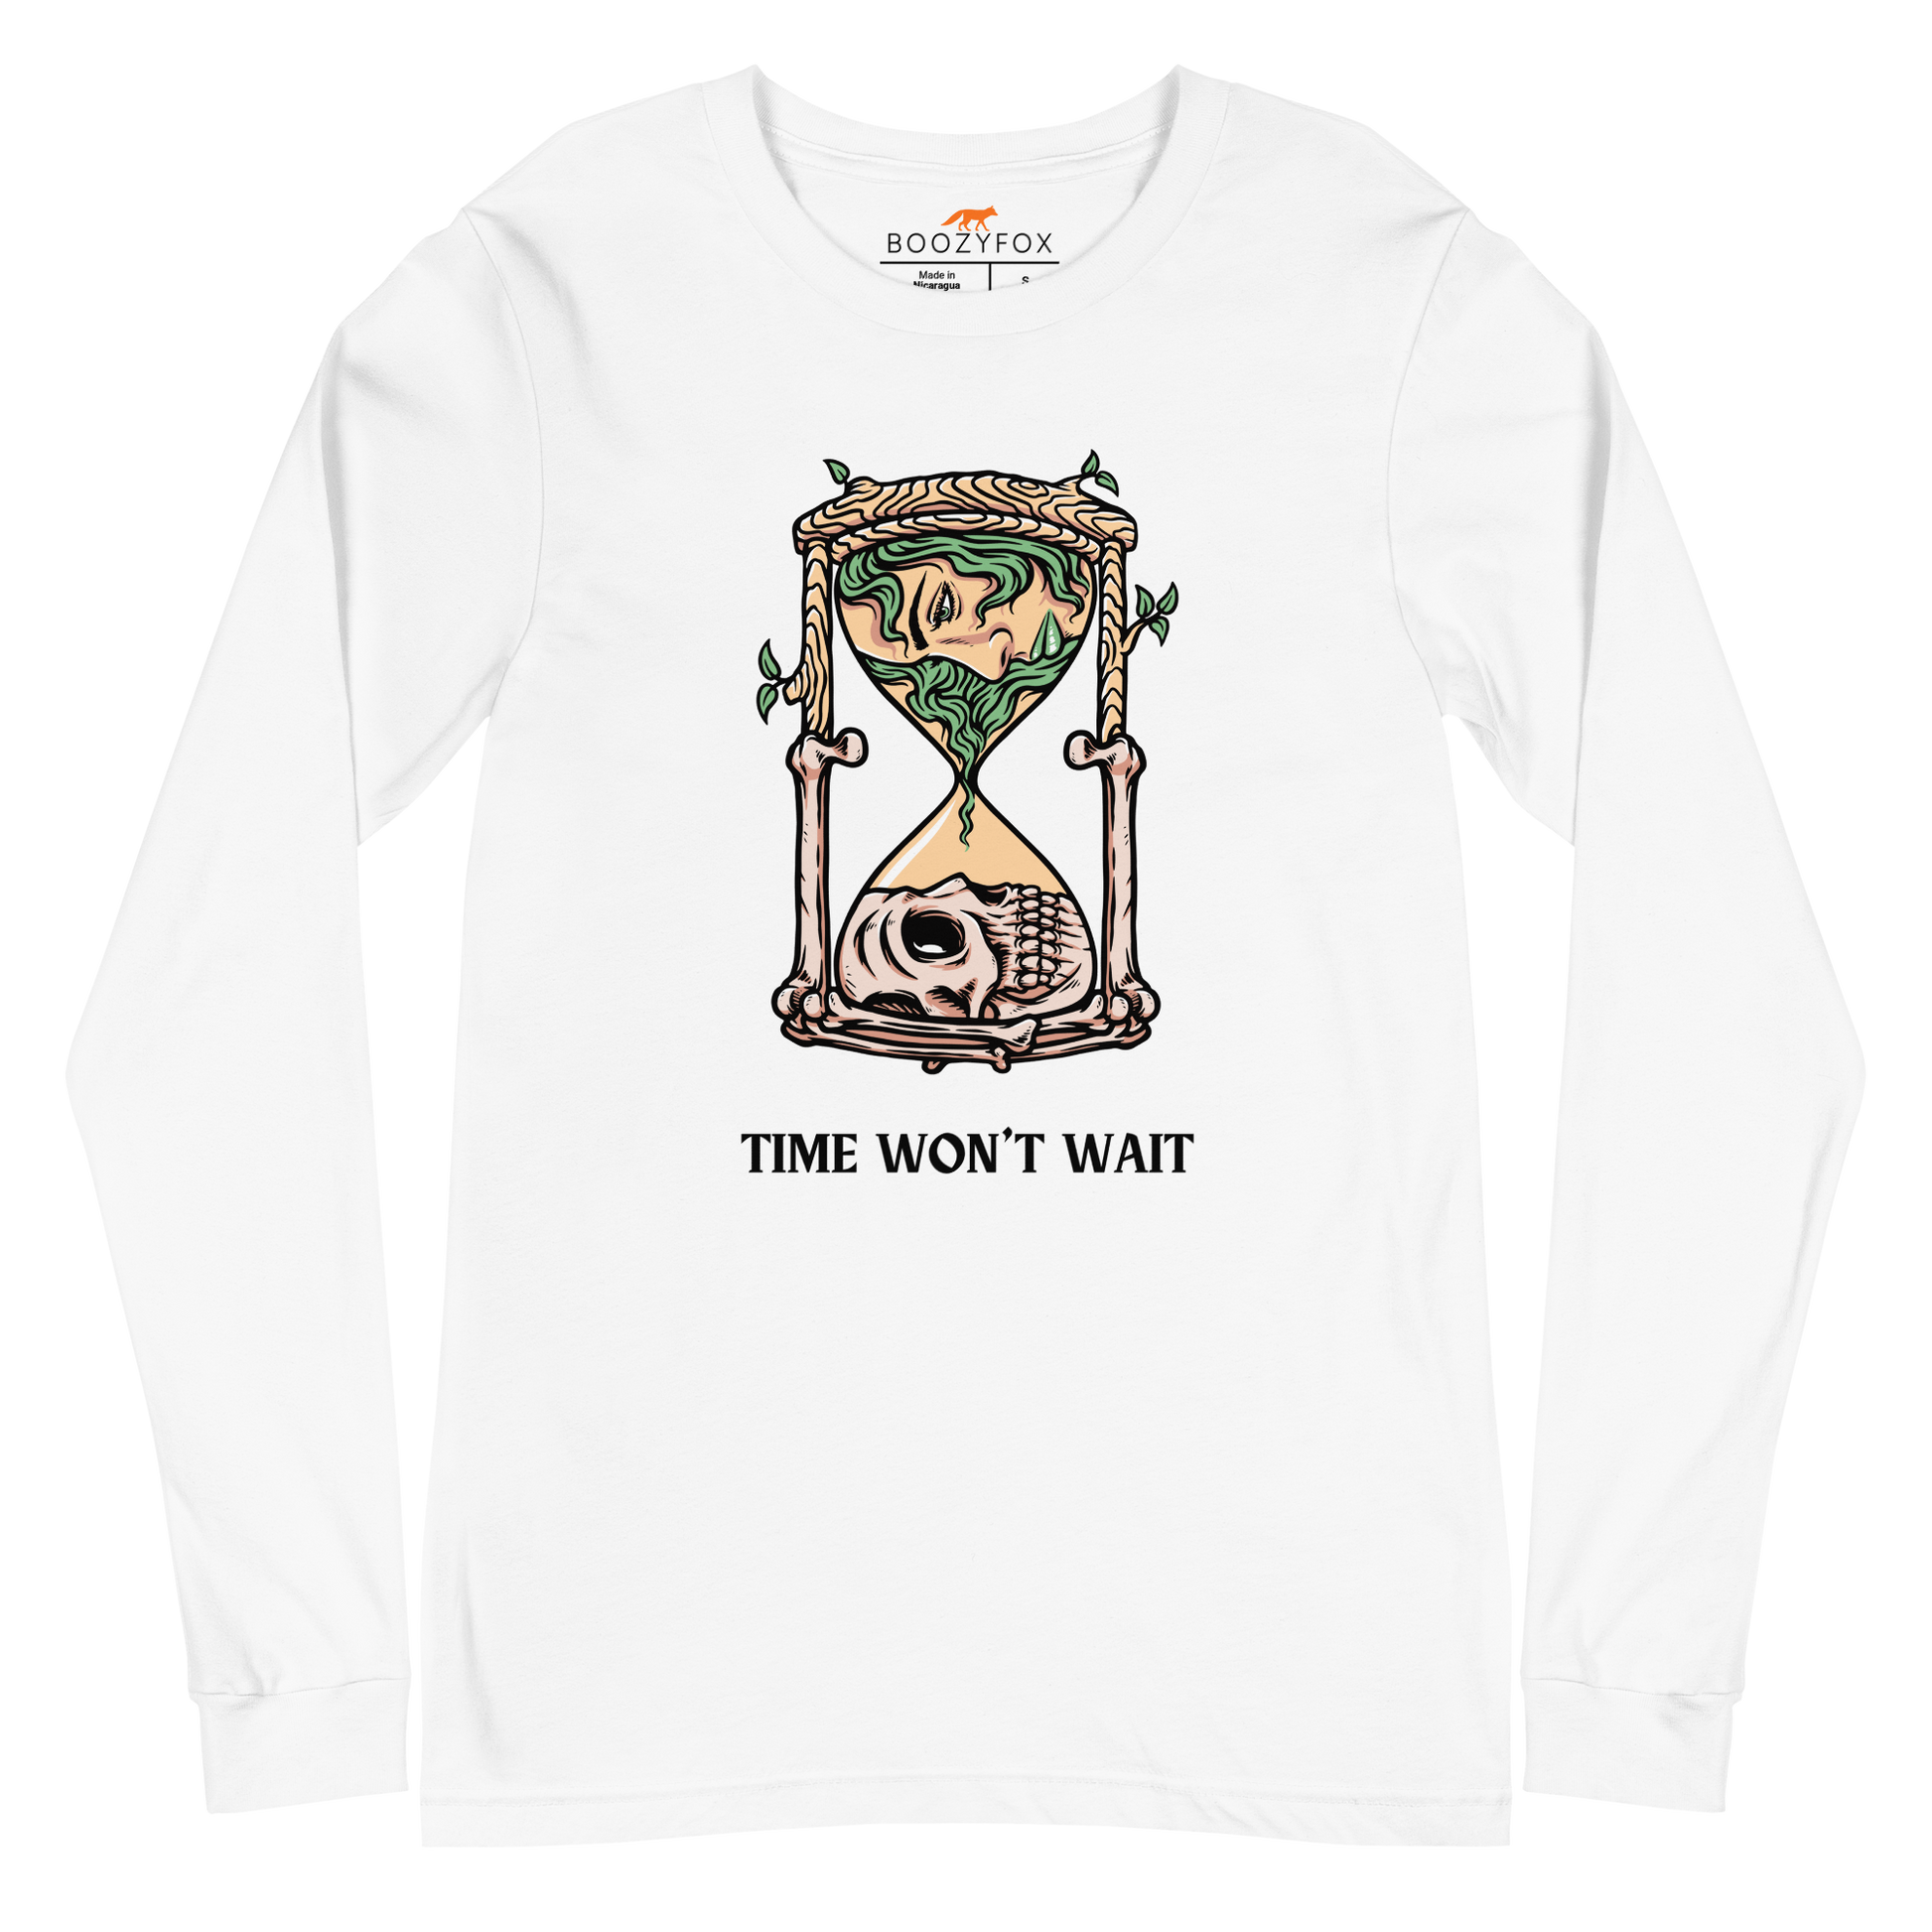 White Hourglass Long Sleeve Tee featuring a captivating Time Won't Wait graphic on the chest - Cool Hourglass Long Sleeve Graphic Tees - Boozy Fox